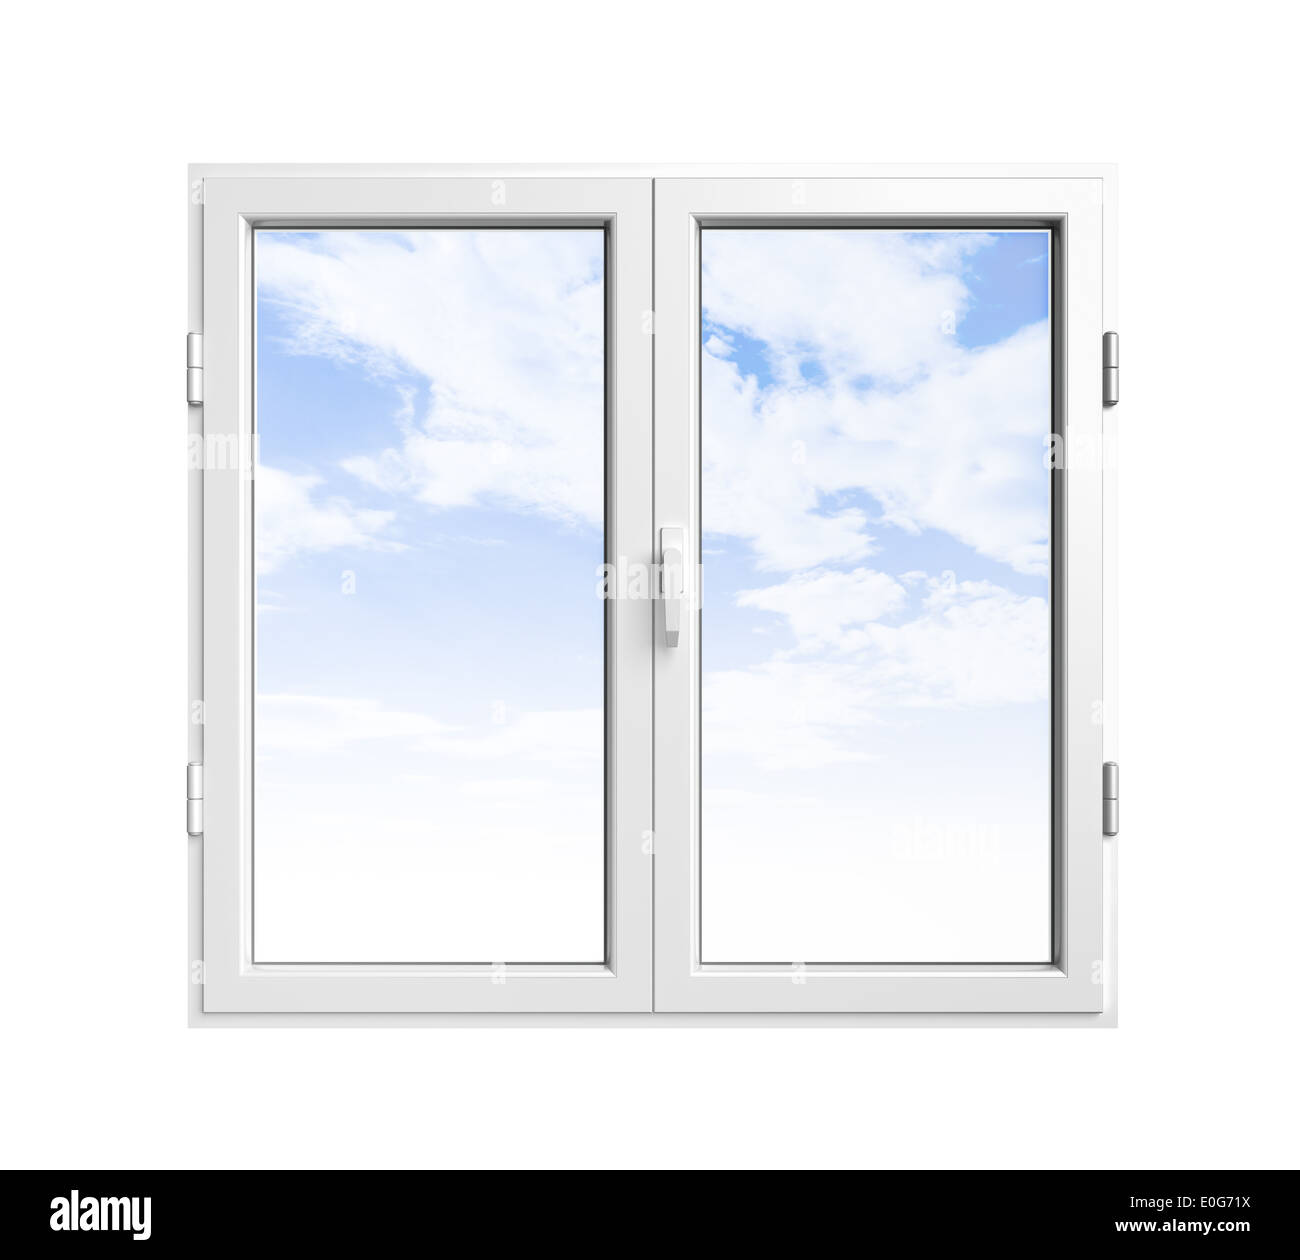 PVC window with blue sky behind isolated on white background Stock Photo